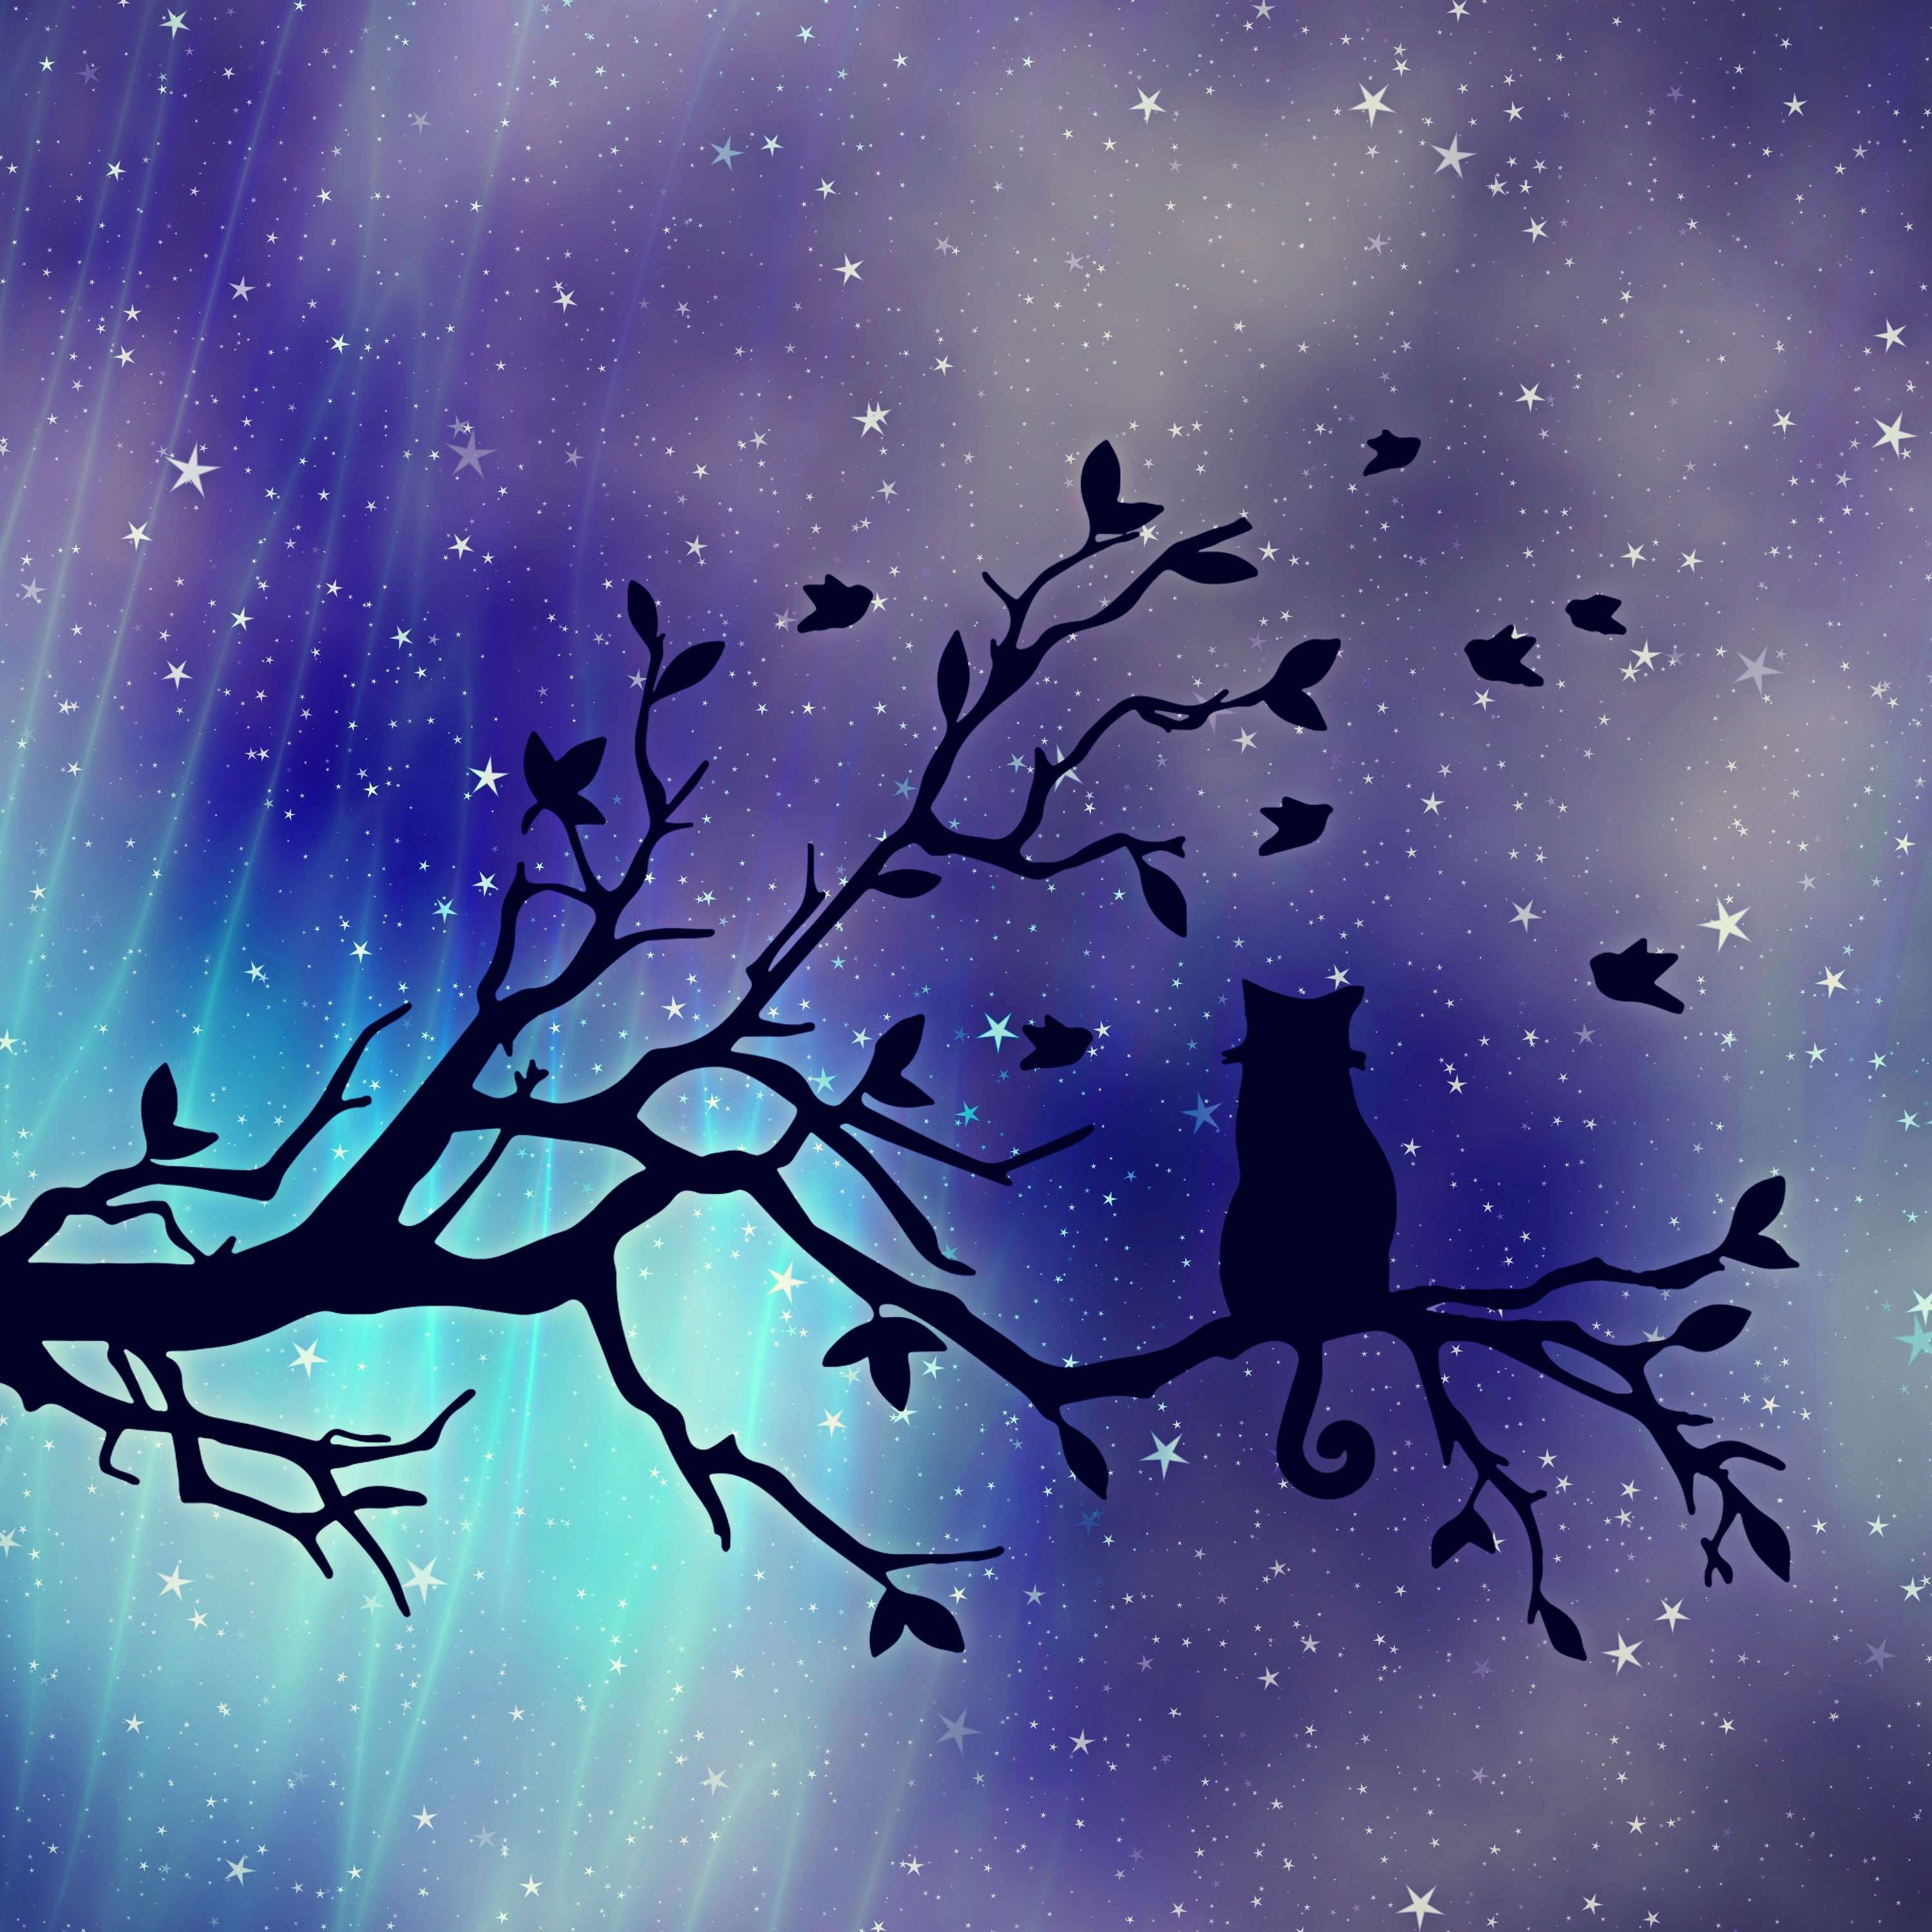 aesthetic, animal, atmosphere, background, birds, blue, cat, composing, decorative, digiart, evening sky, mood, night sky, star, starry sky, texture, tree, turquoise Gallery HD Wallpaper